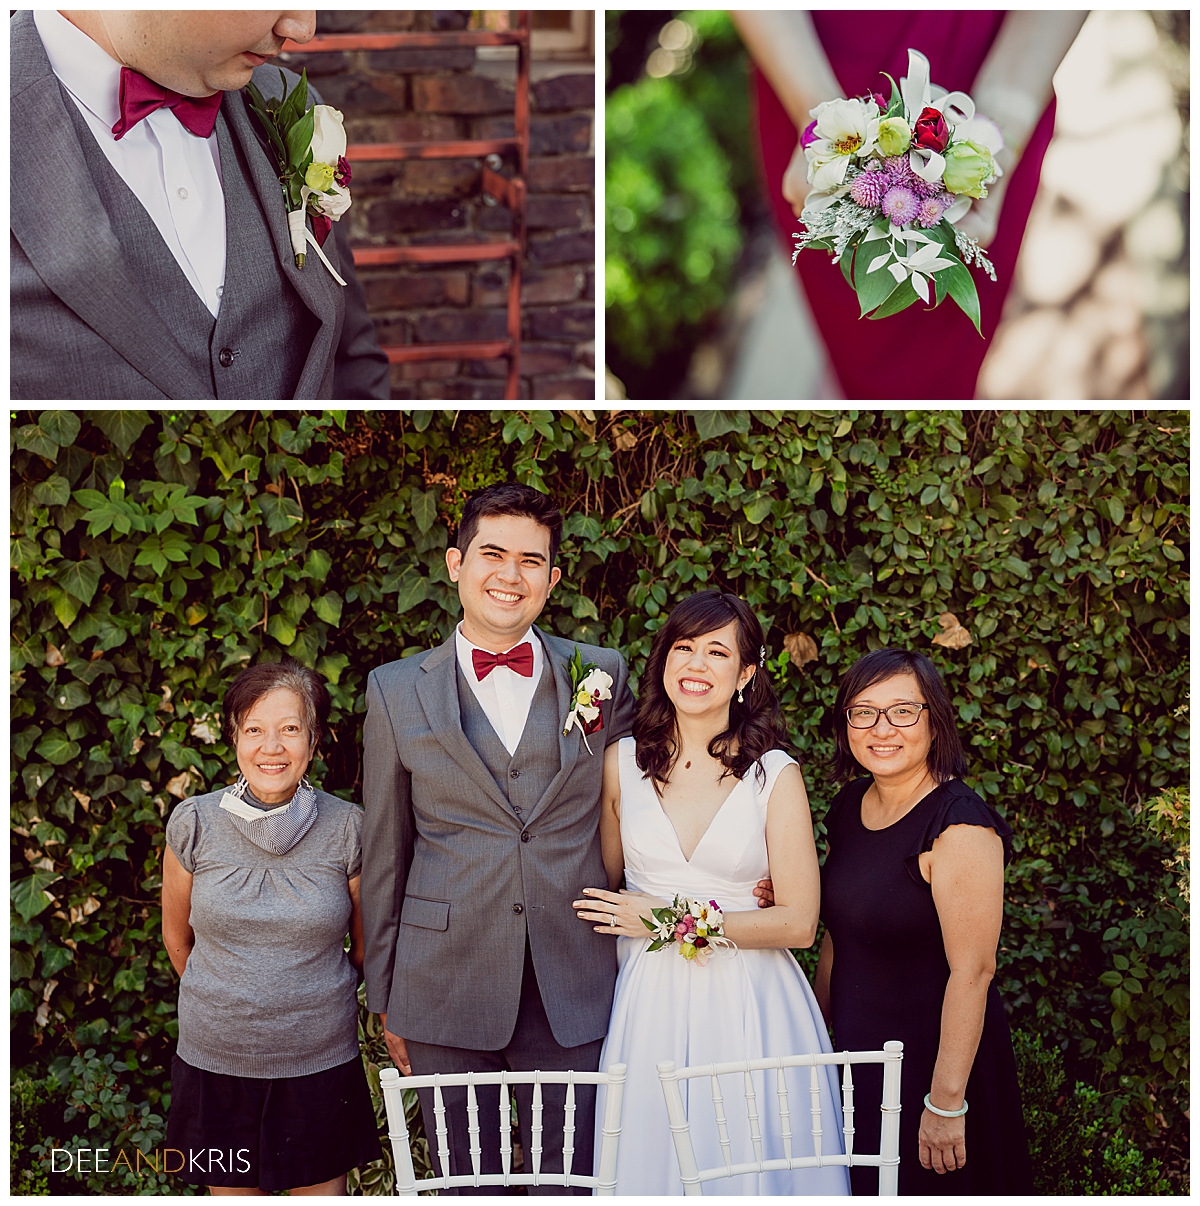 Three images of groom's boutonniere, bride's corsage, and the florists from Katrione's Blooms.